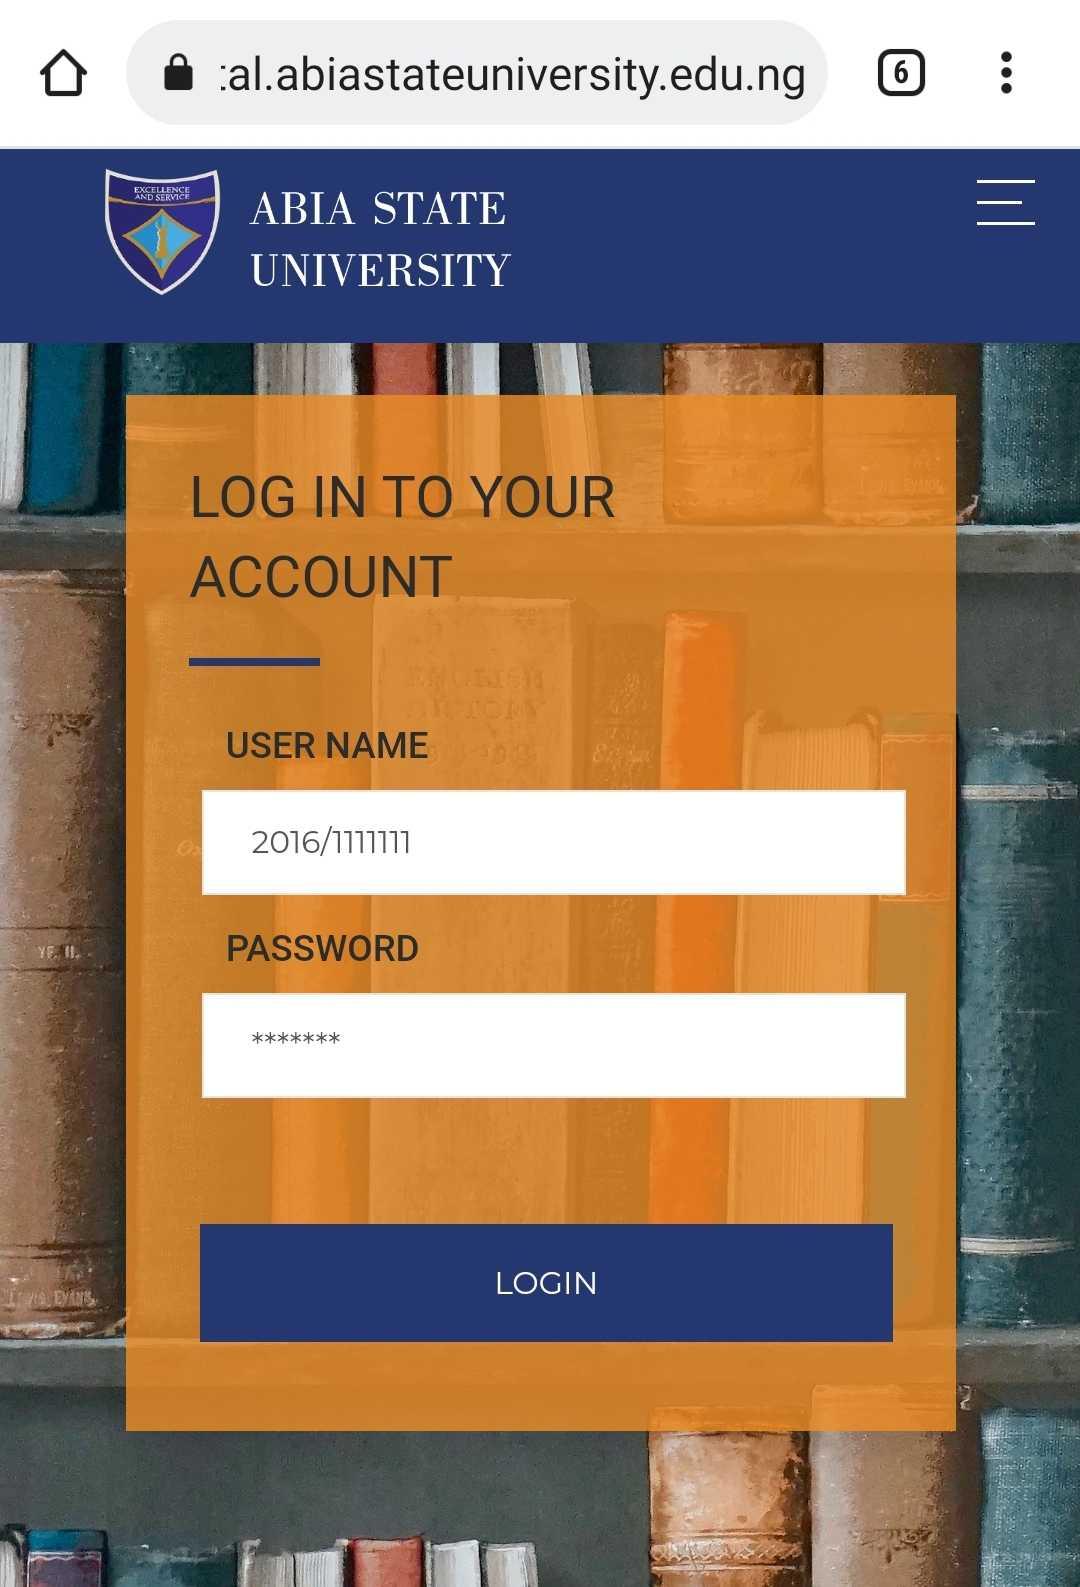 Cover Image for How to ABSU check semester results on ABSU portal online